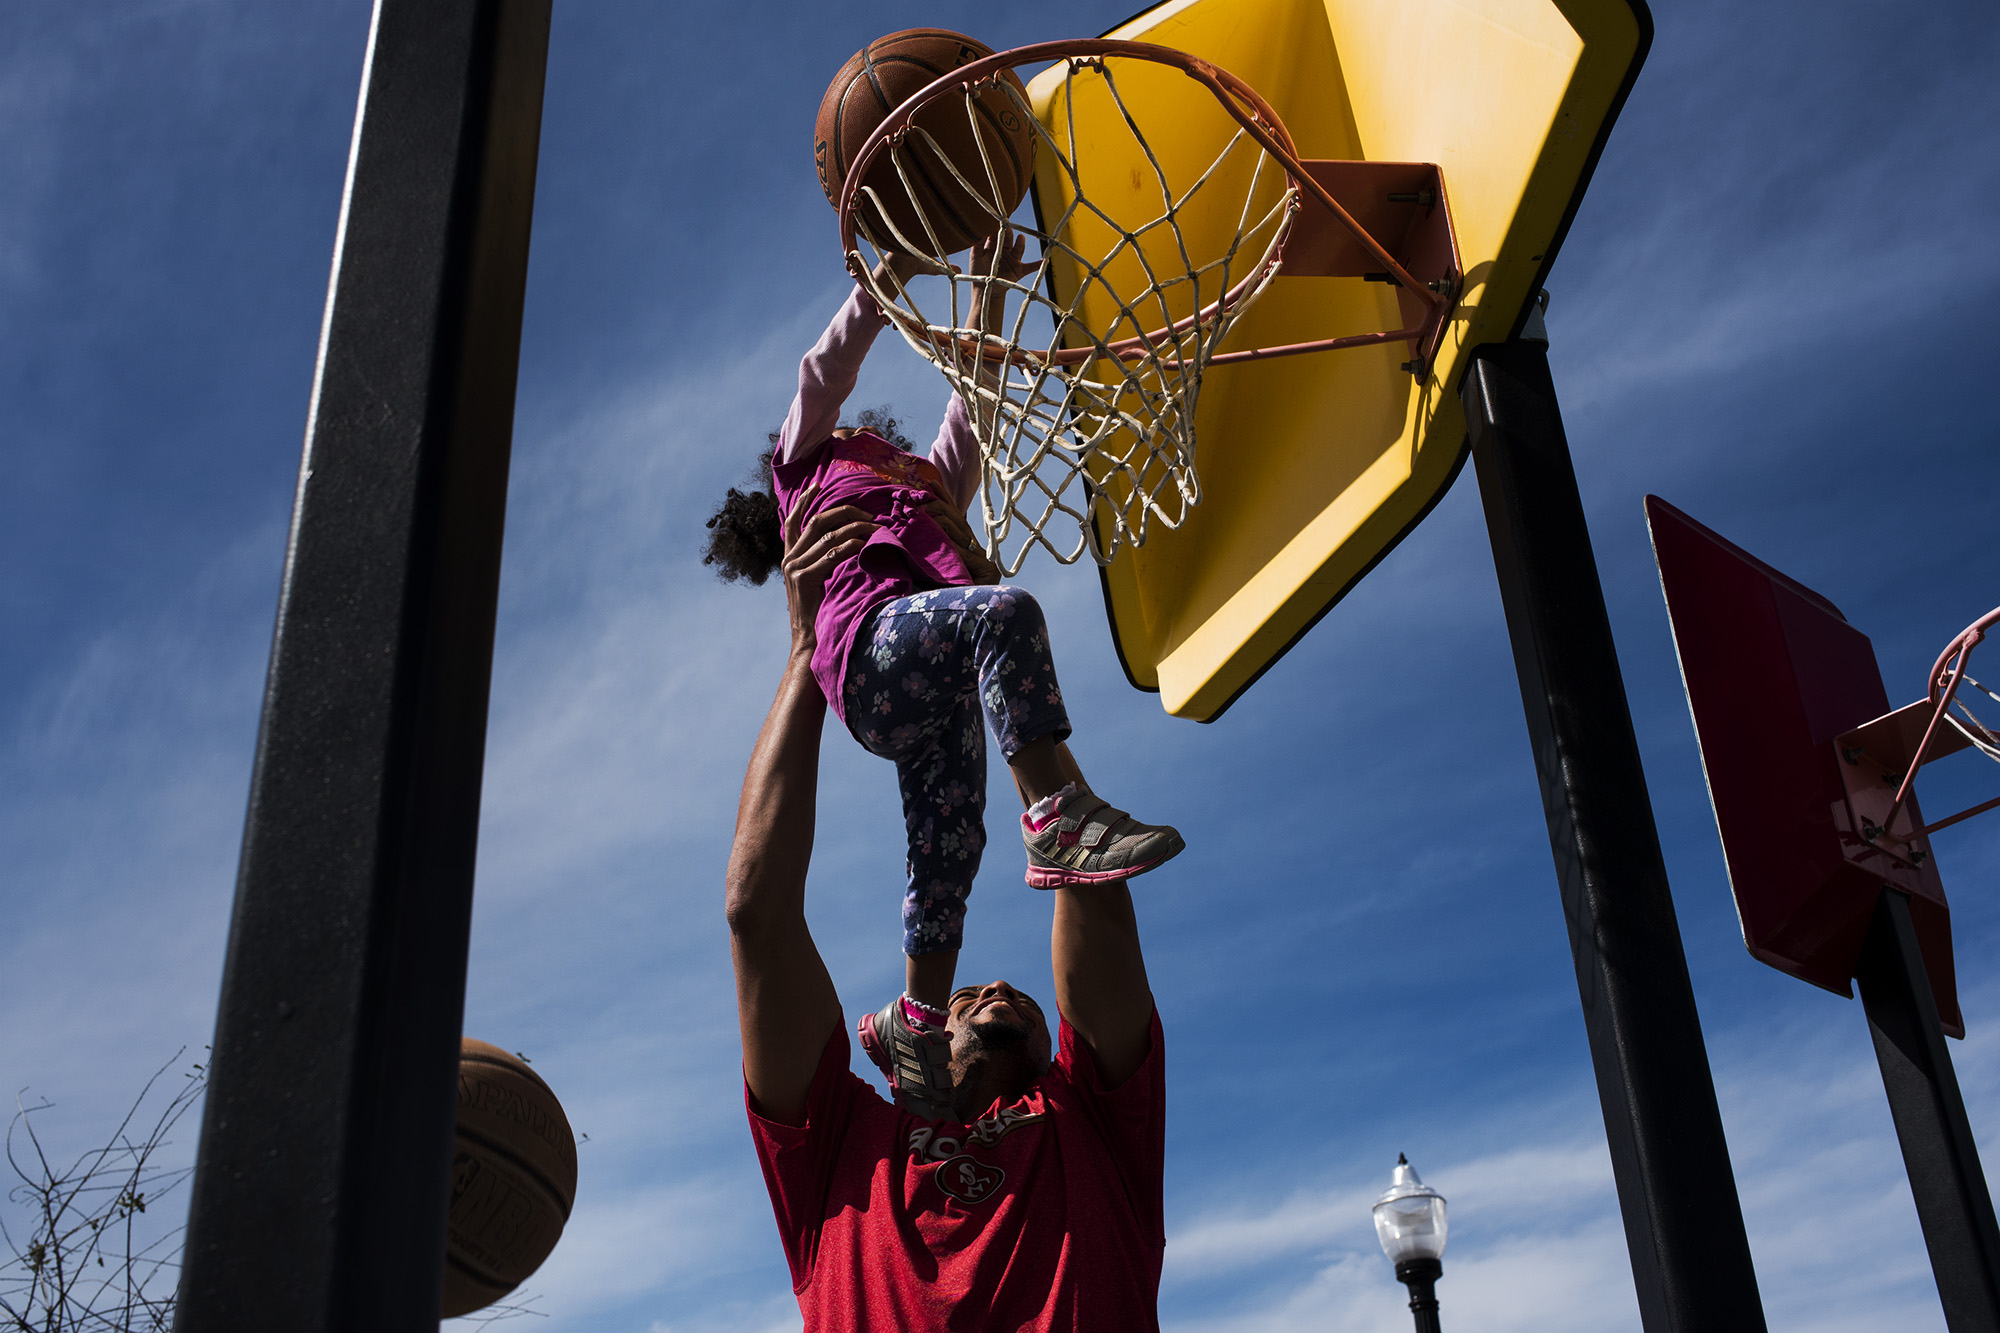 Father lifting child to dunk basketball - documentary family photography